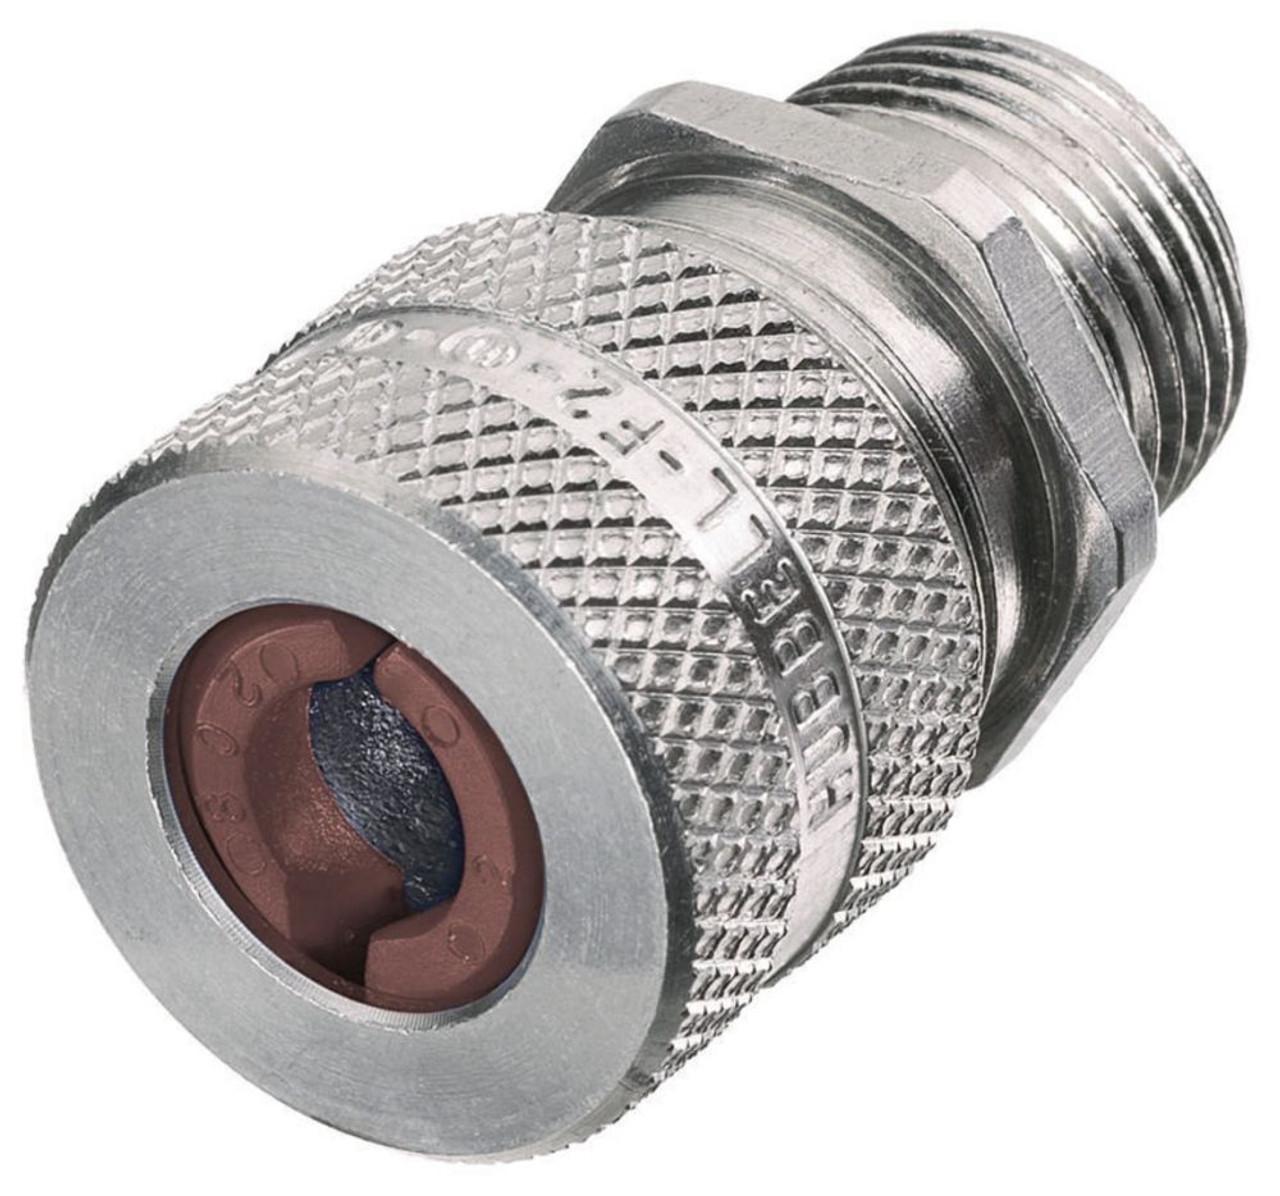 Hubbell SHC1034 Kellems Wire Management, Cord Connectors, Straight Male, .50-.63", 3/4", Aluminum  ; Aluminum cord connector provides durable performance ; Knurled finish makes them easy to handle and maintain UL listing by hand tightening ; Lightweight design ; Standard